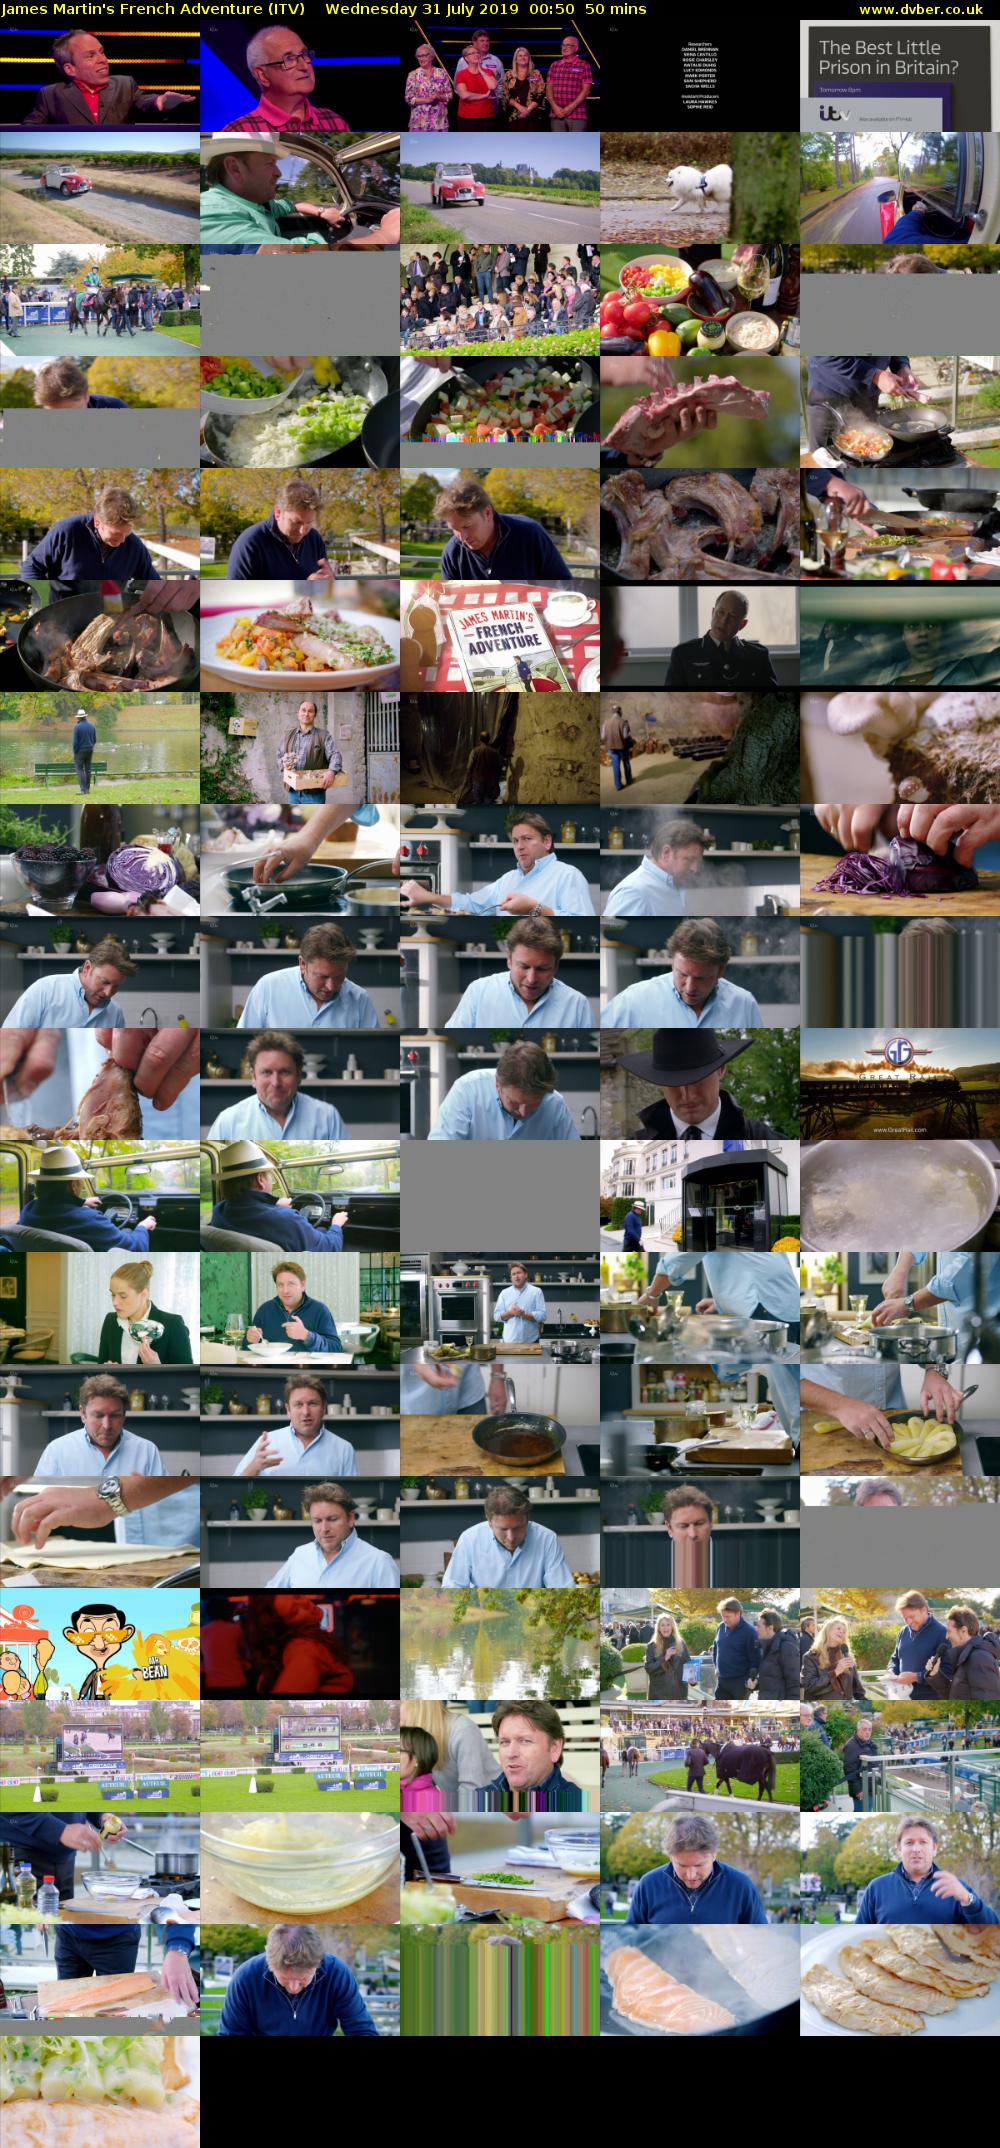 James Martin's French Adventure (ITV) Wednesday 31 July 2019 00:50 - 01:40